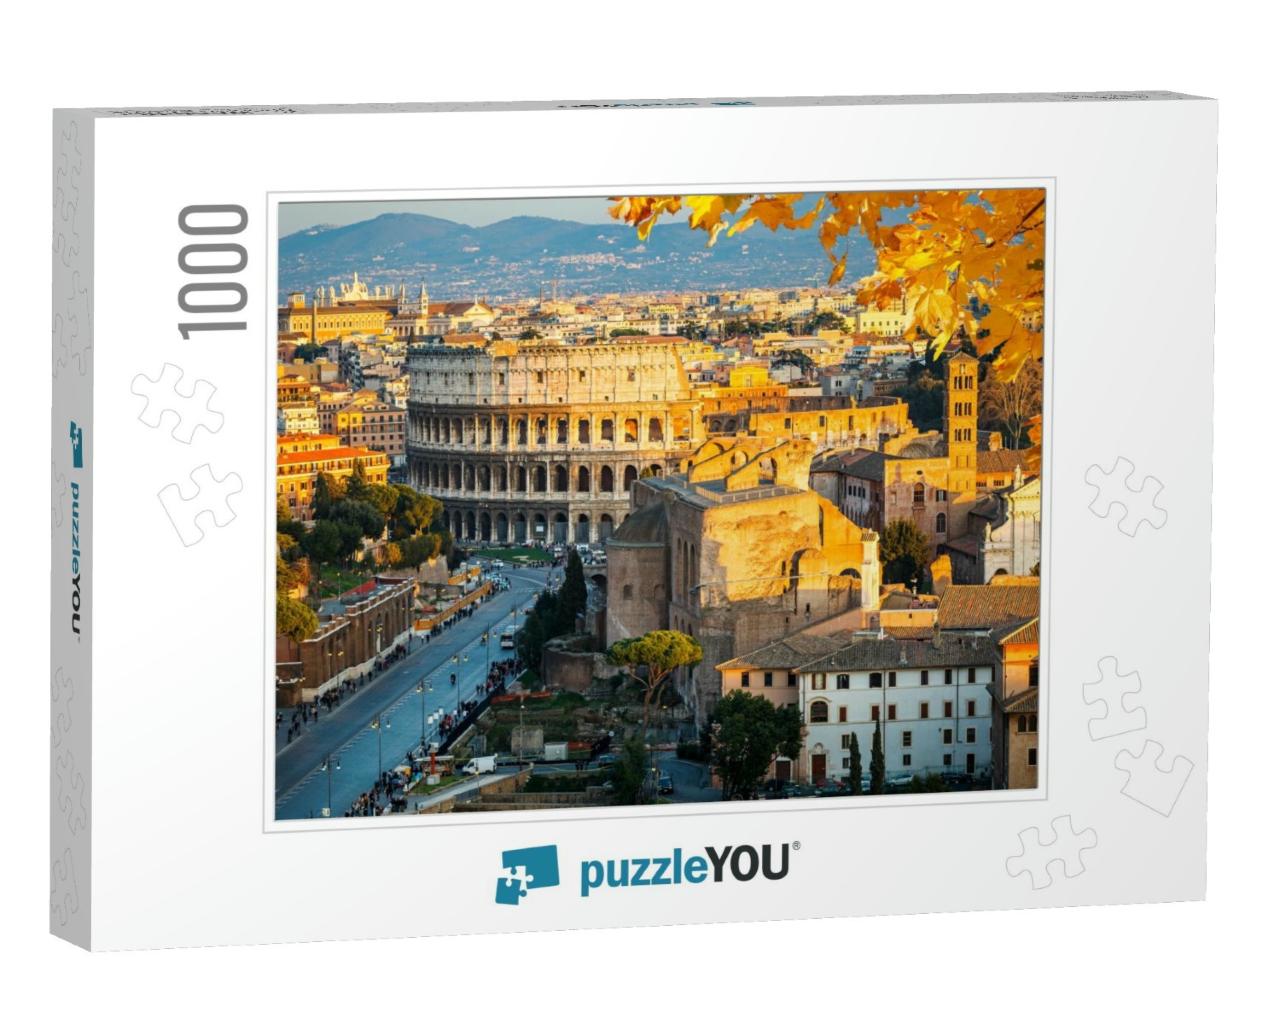 View on Colosseum in Rome, Italy... Jigsaw Puzzle with 1000 pieces